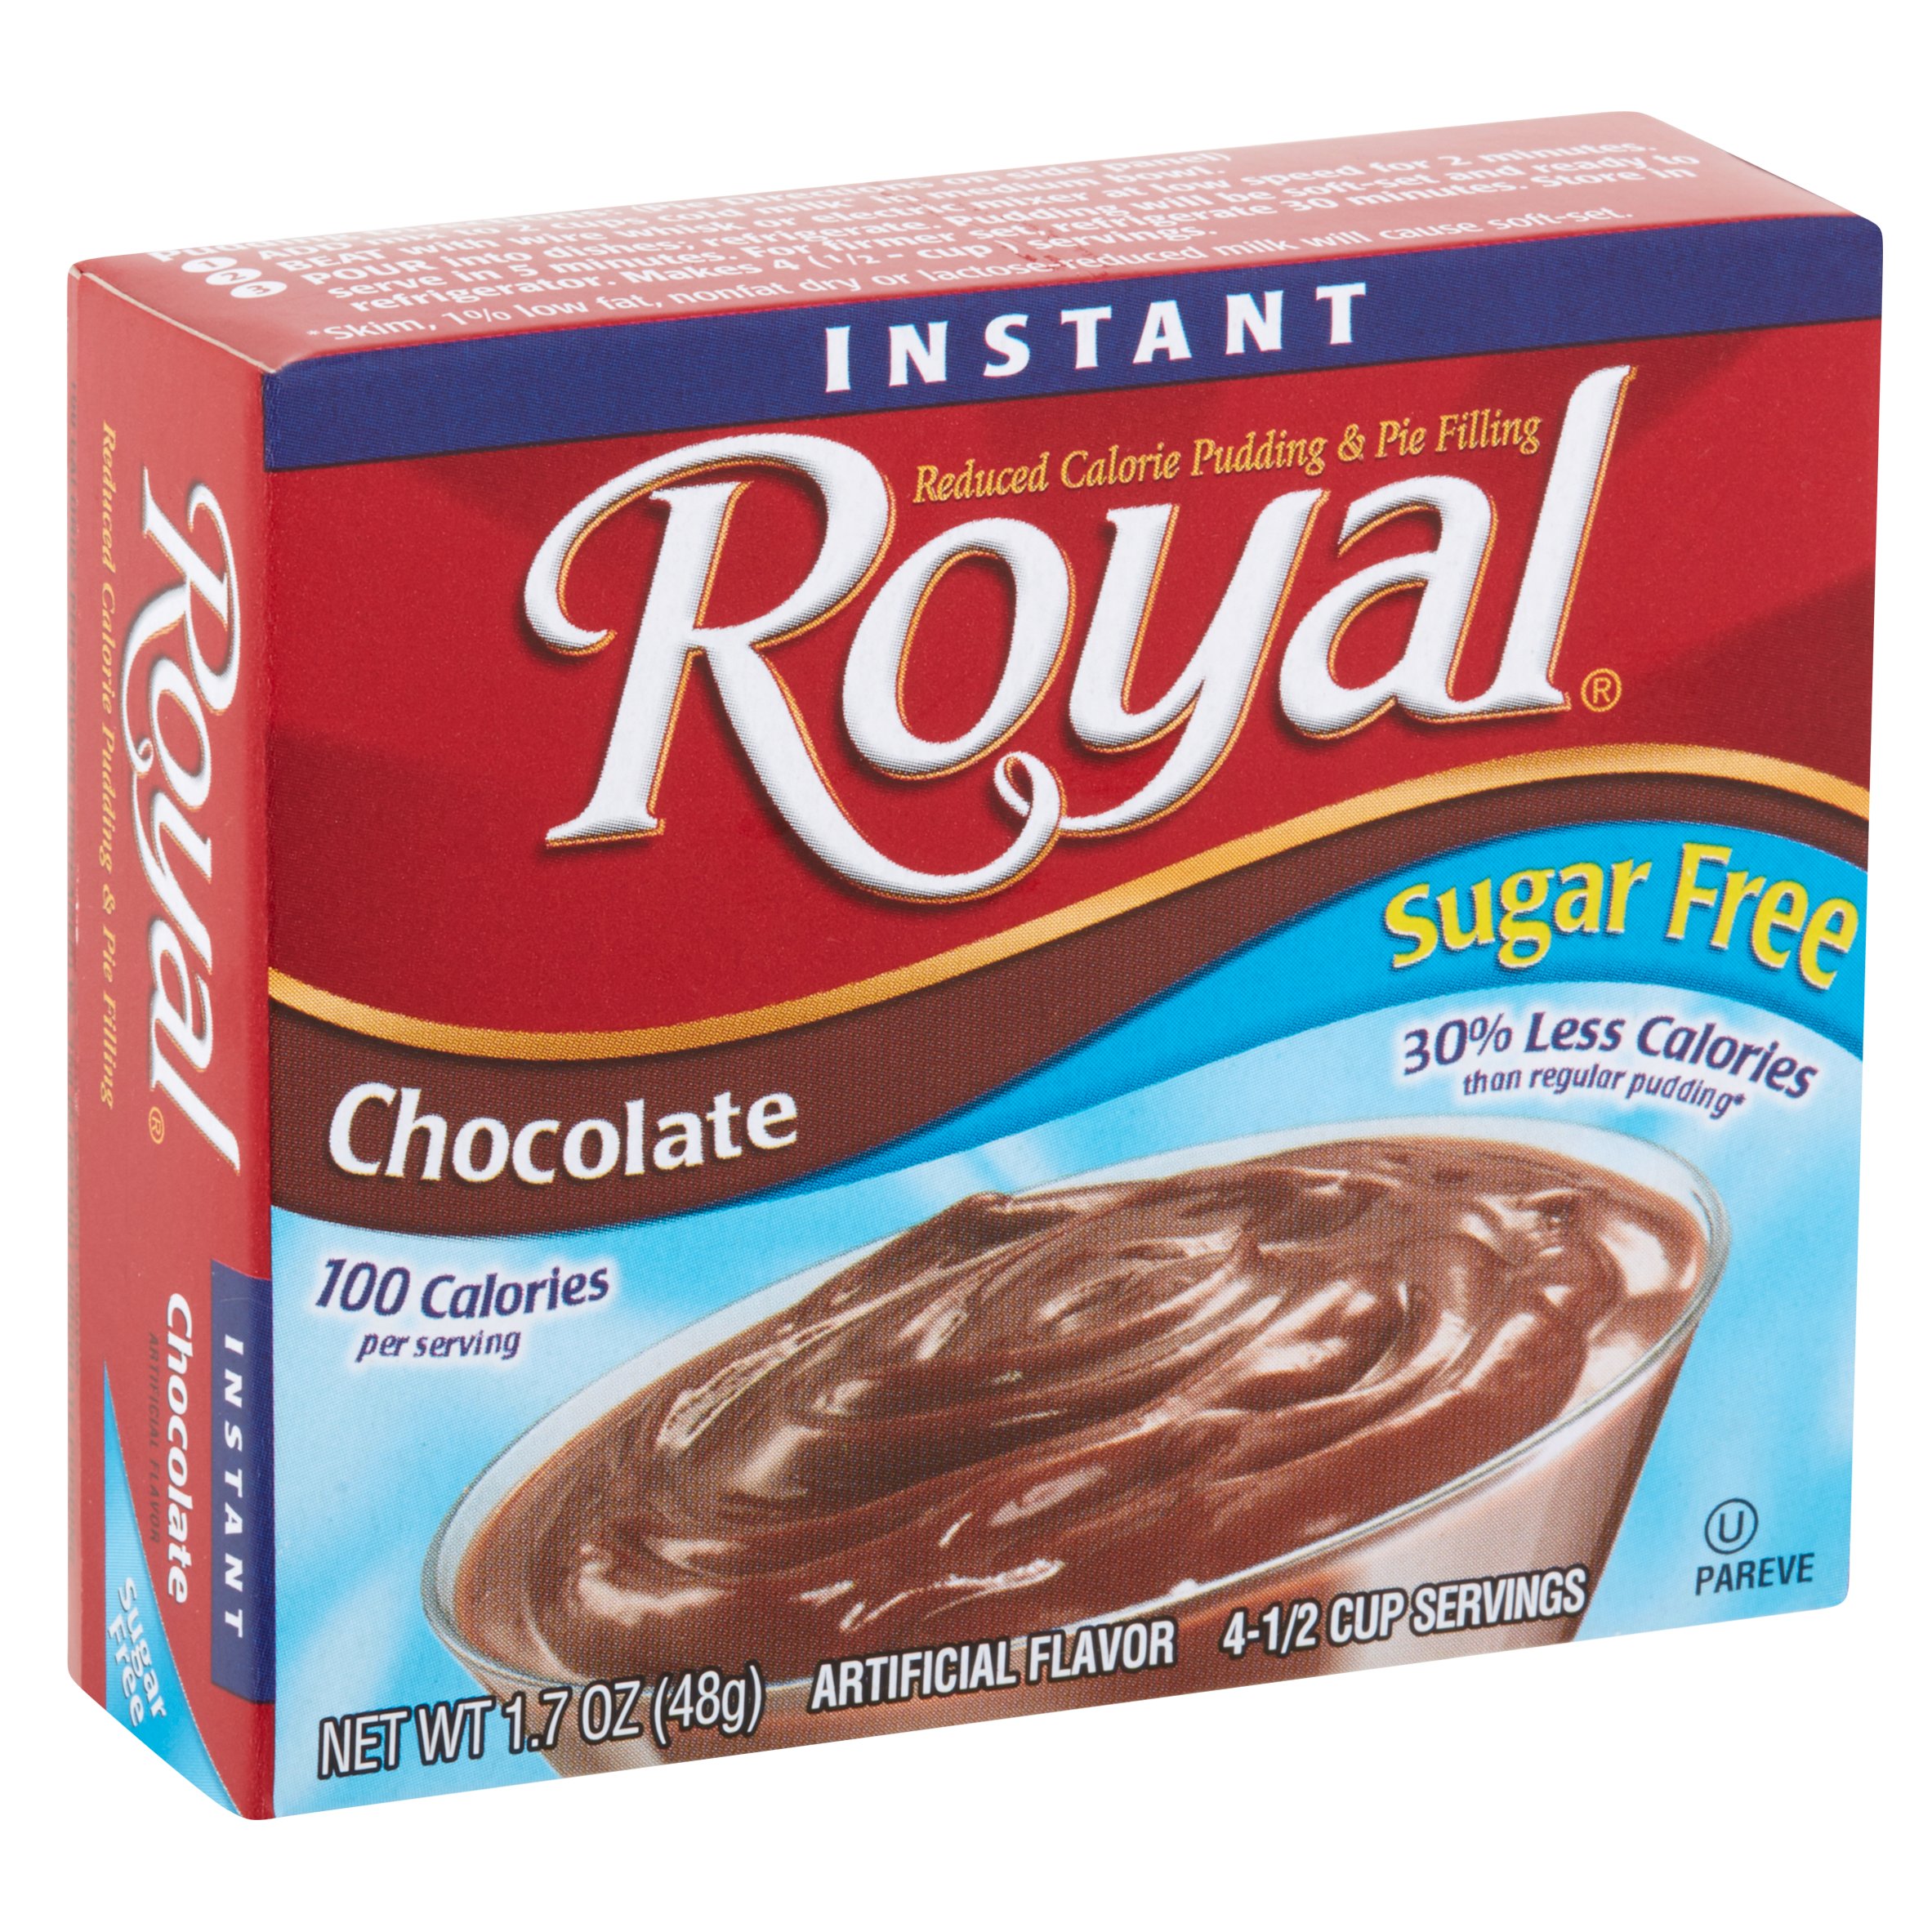 Royal Instant Sugar Free Chocolate Reduced Calorie Pudding & Pie Filling, 1.7 oz - image 2 of 5